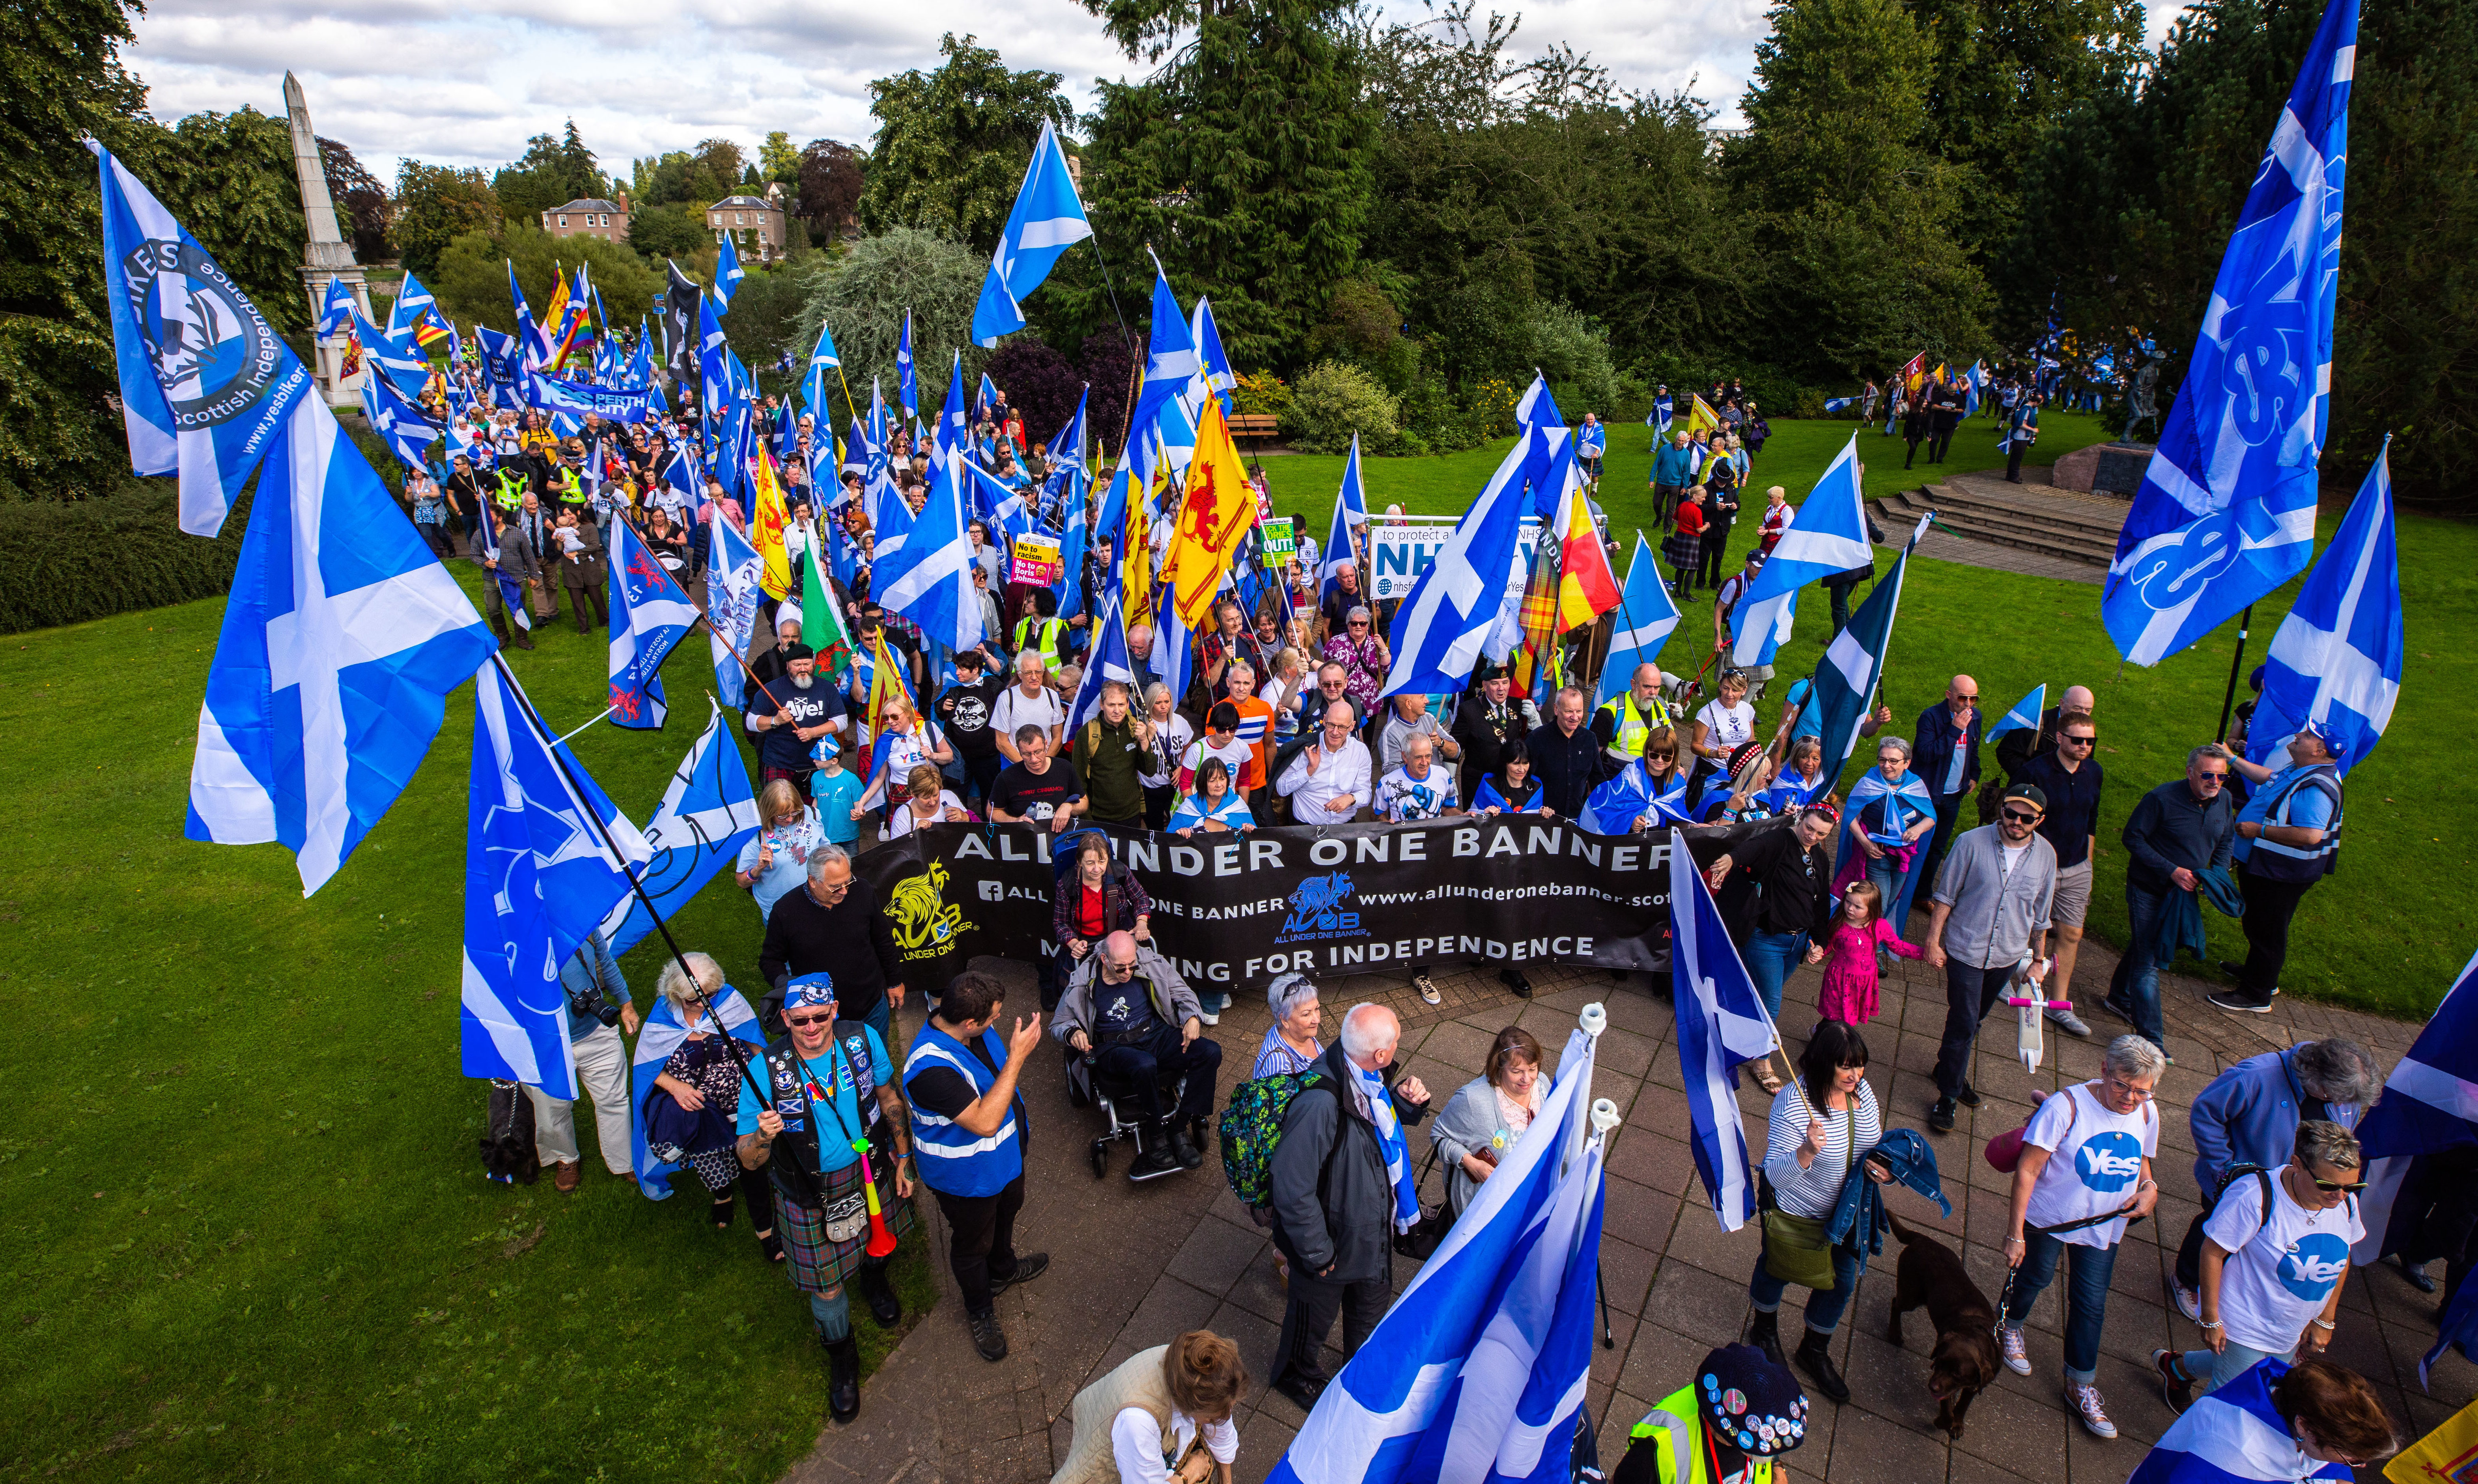 The All Under One Banner march in Perth last year.